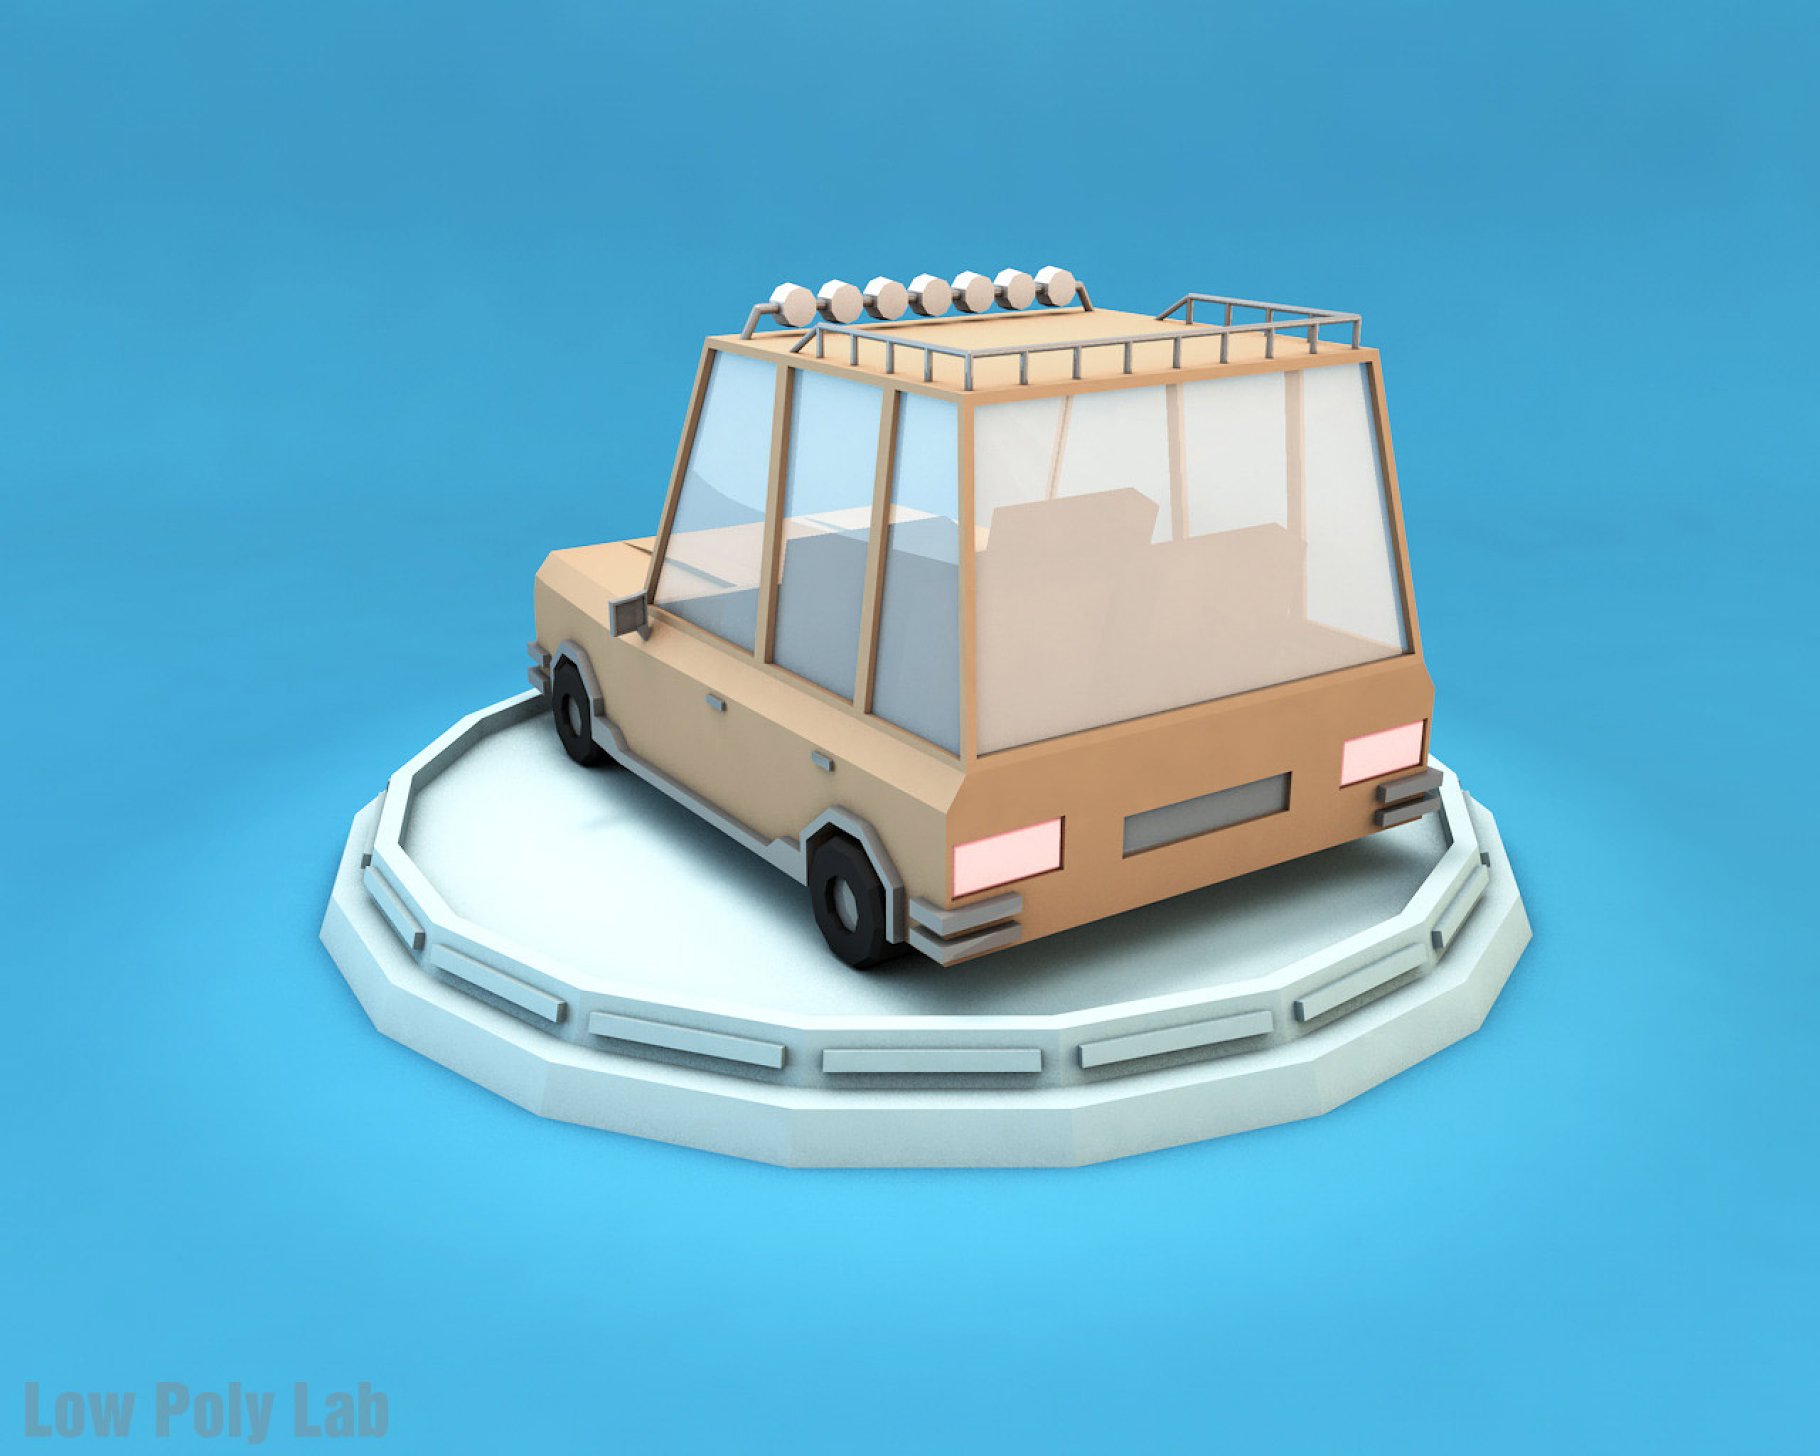 Low poly car jeep back mockup in beige on a blue background.